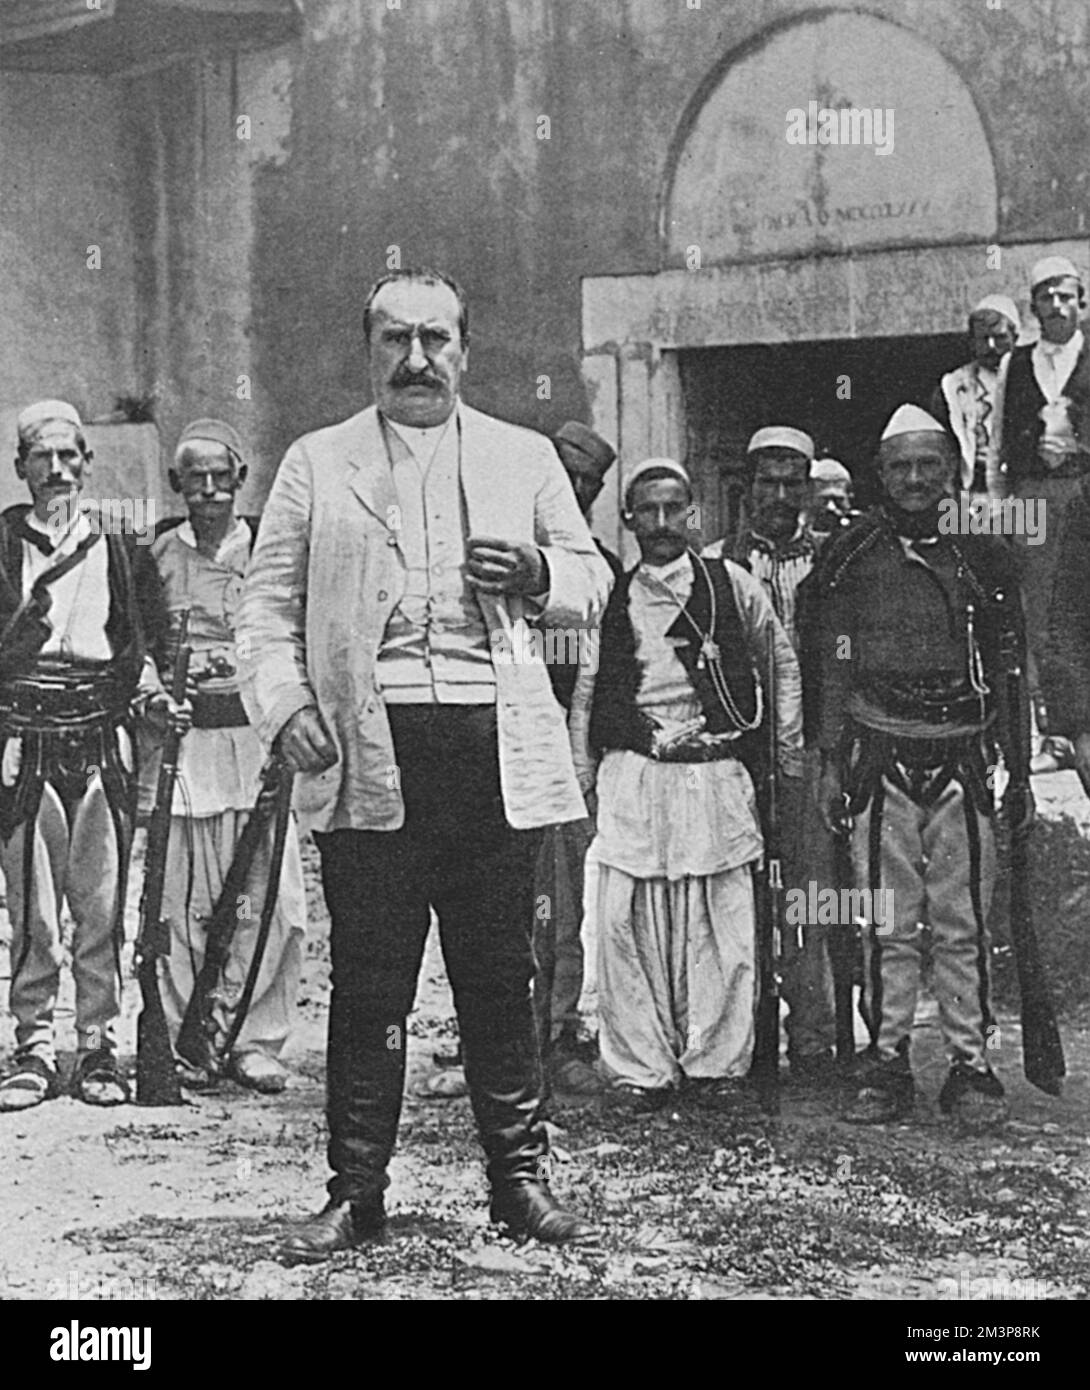 Prenk Bib-Doda, appointed foreign minister of Albania by Prince William of Wied in May 1914. He is pictured with some of the Mirditi people, from the Mirdita district of northern Albania, who supported Prince William against insurgents.  1914 Stock Photo